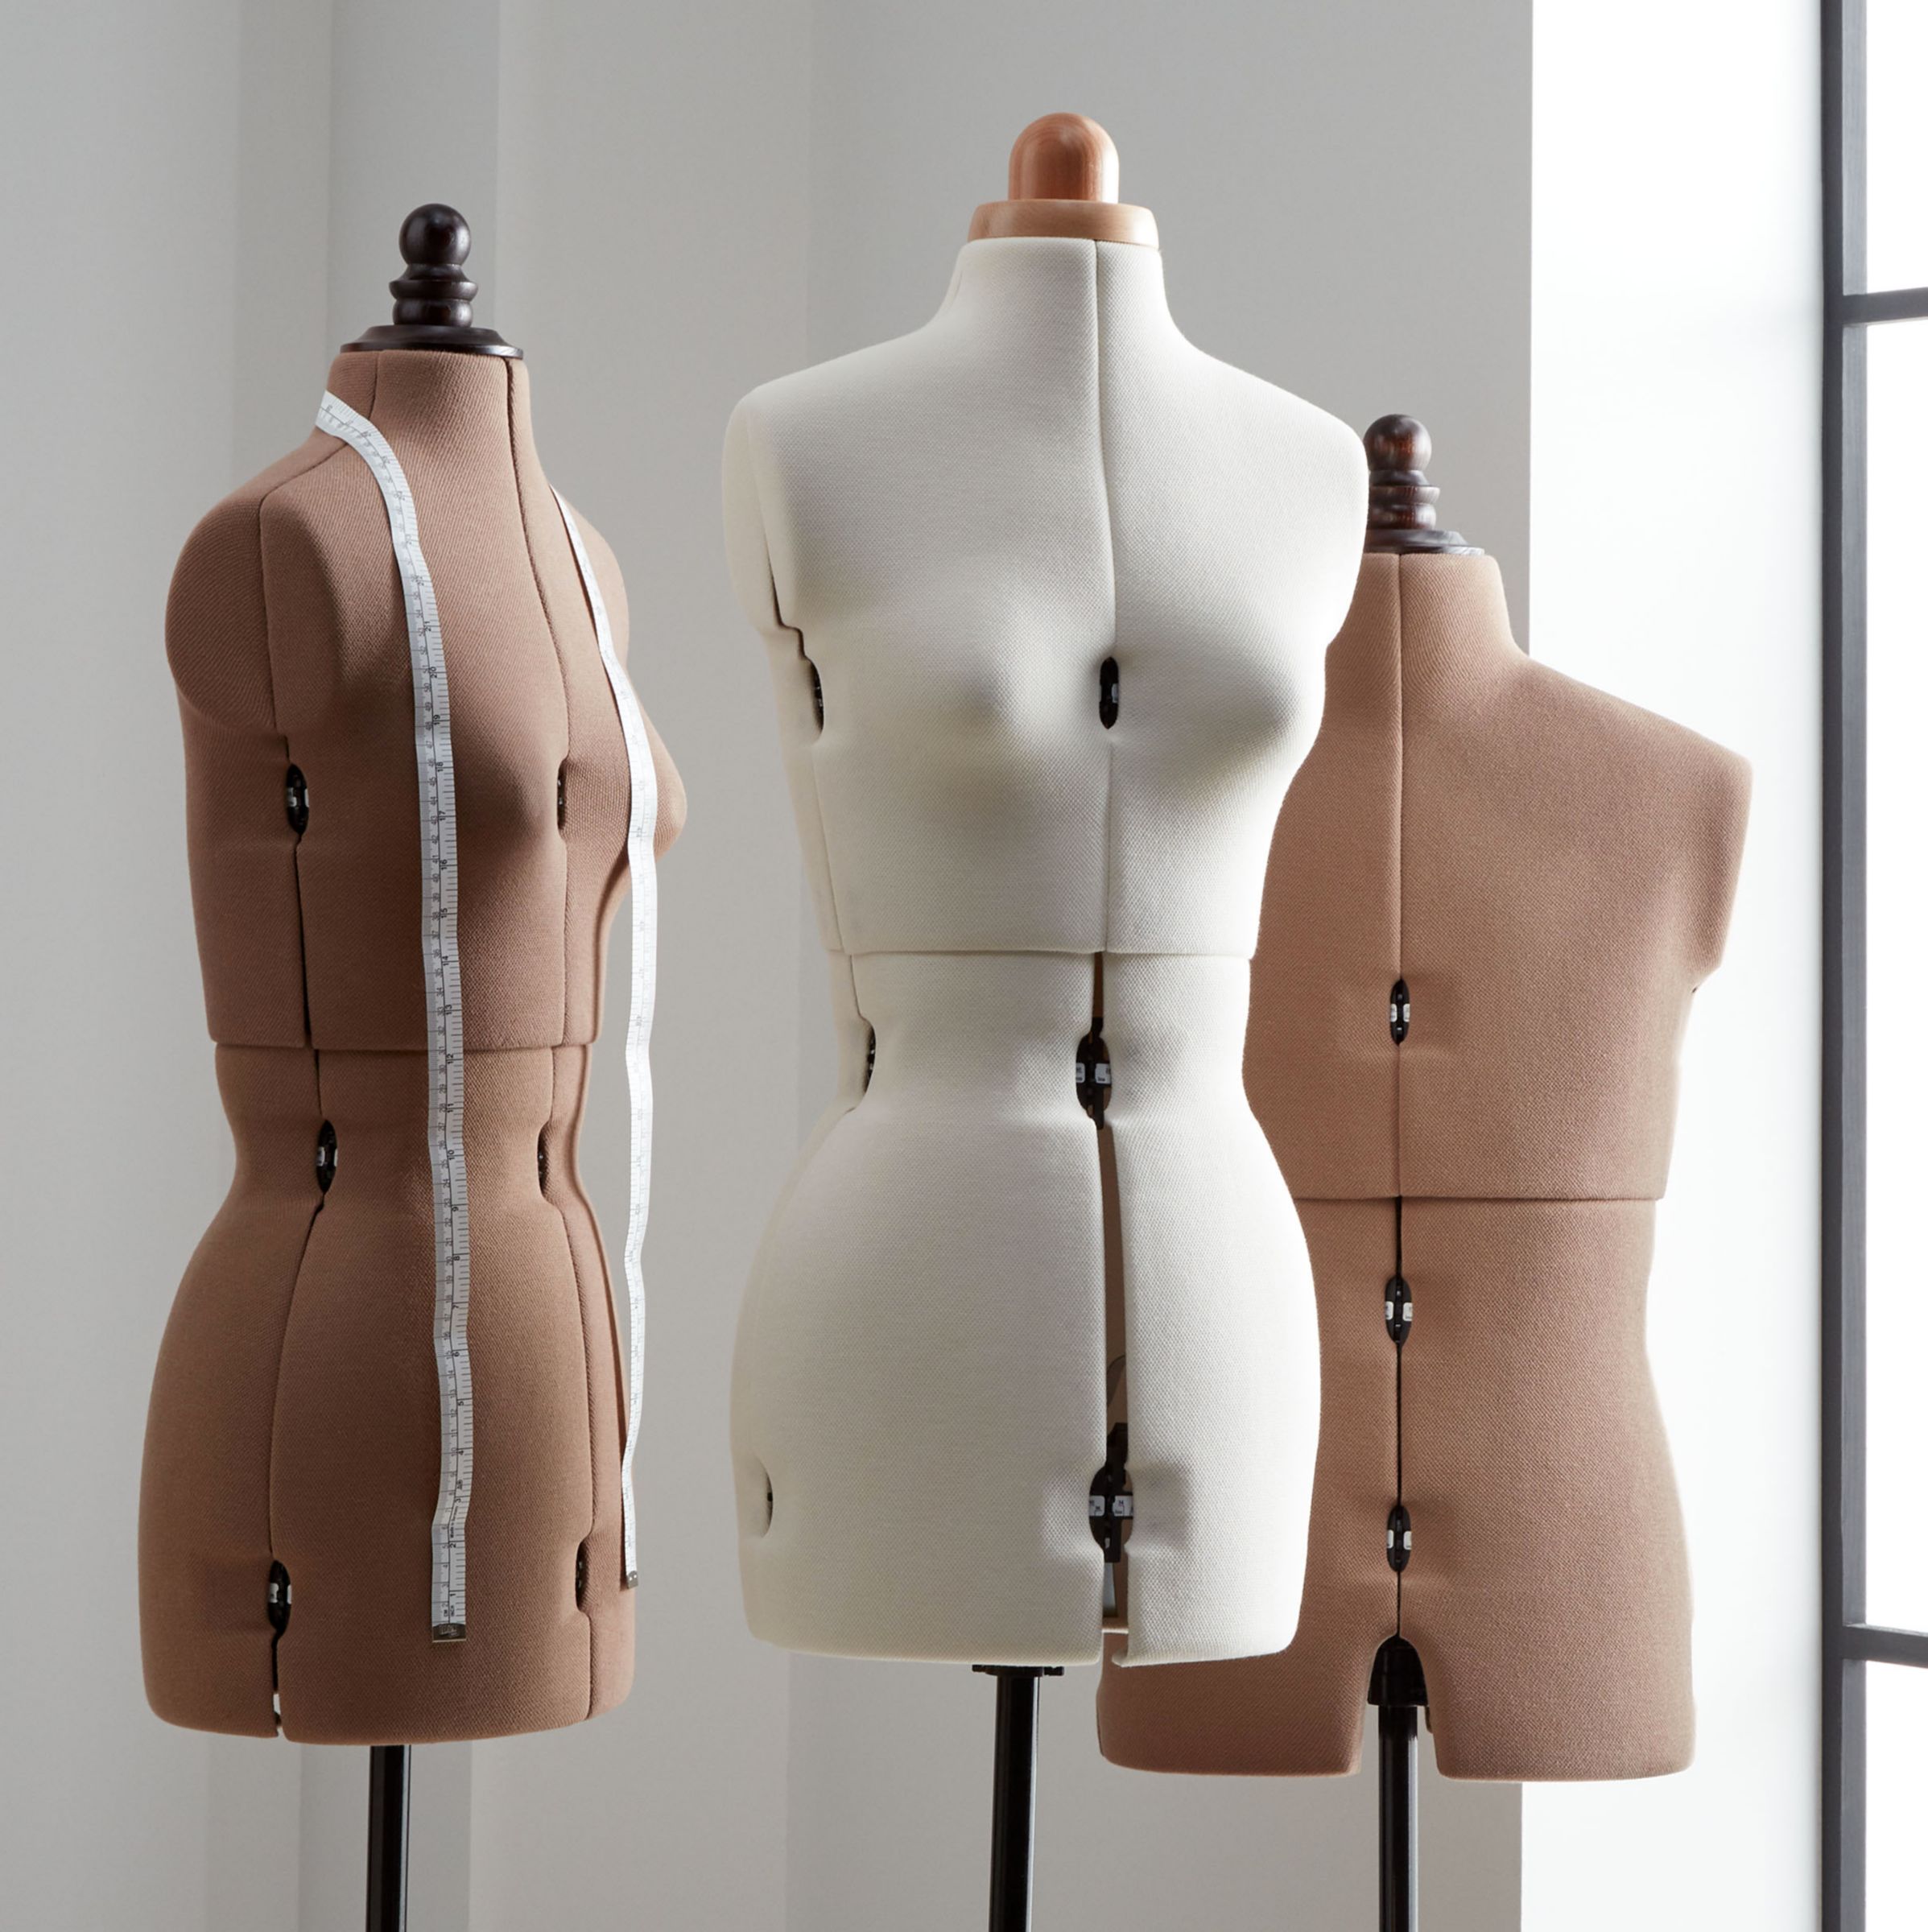 Our mannequins are ideal for dressmaking projects or for creating a distinctive display in your home